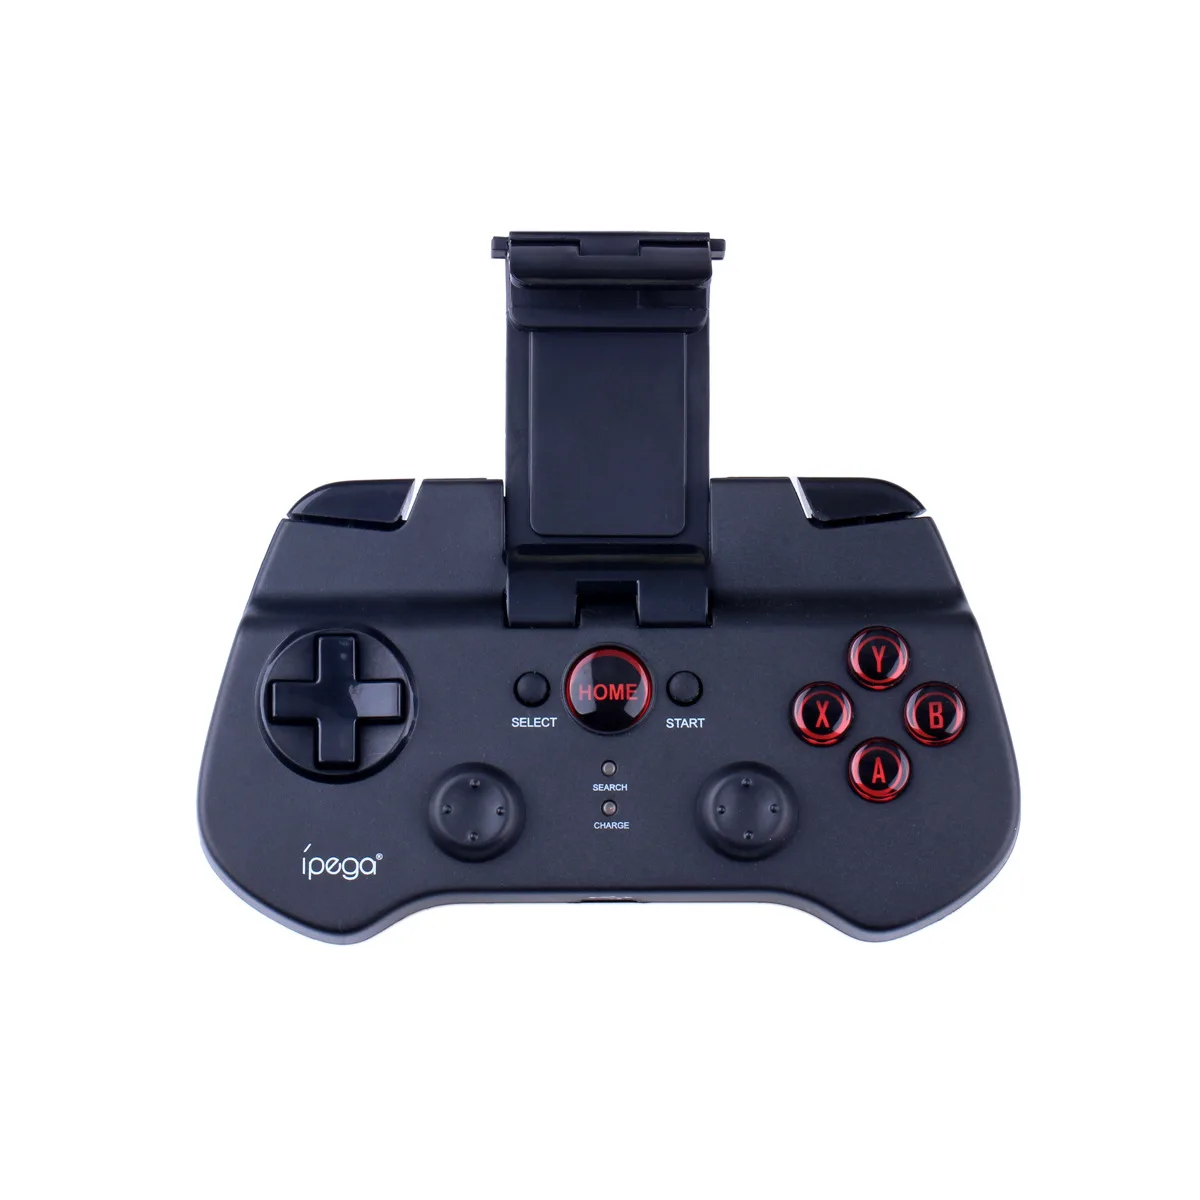 

IPEGA PG 9017S Wireless Gamepad Bluetooth Game Controller Gaming Joystick for Android/ iOS Tablet PC Smartphone TV Box